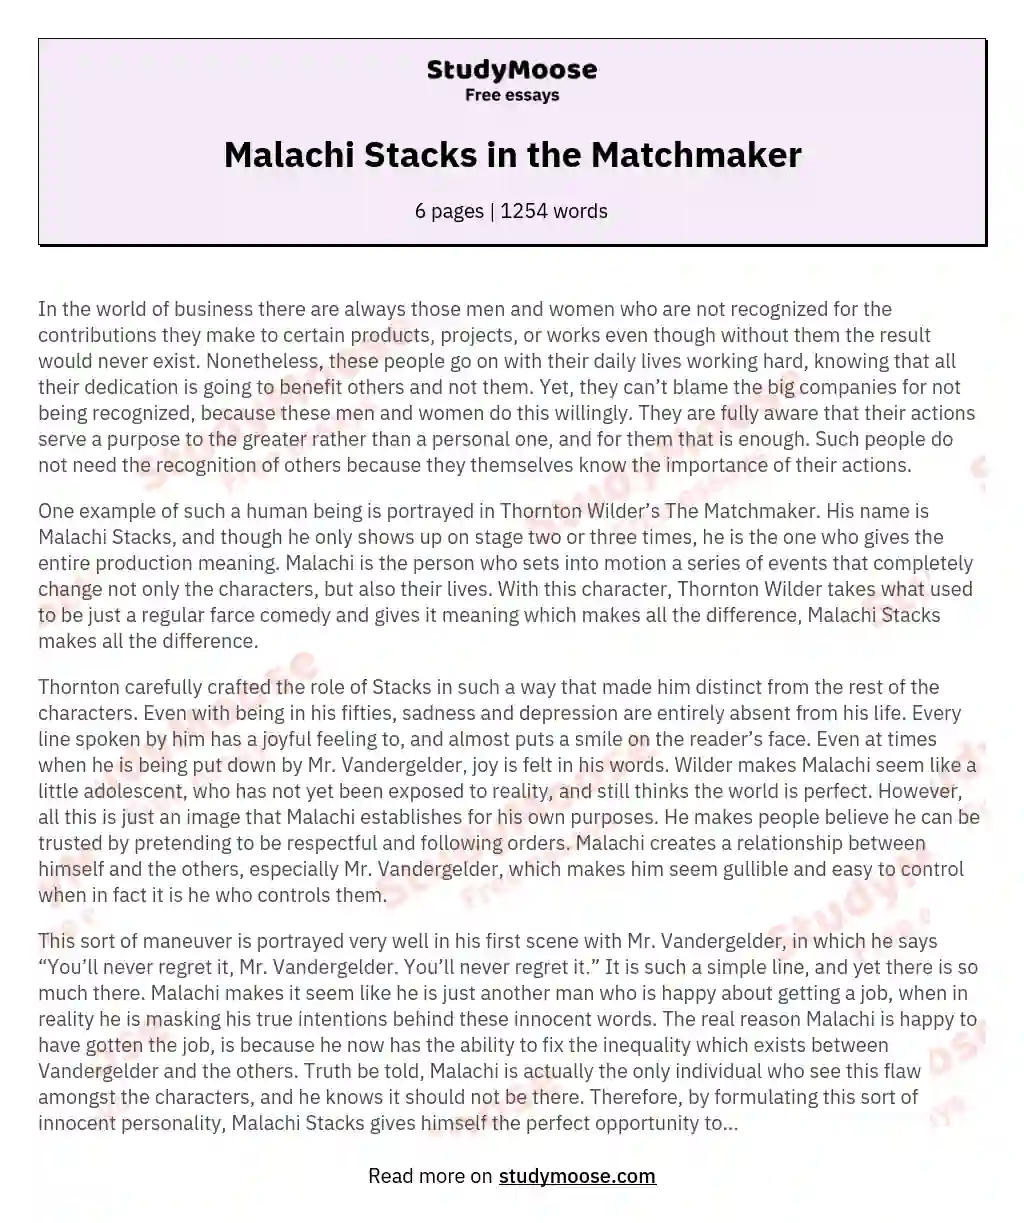 Malachi Stacks in the Matchmaker essay